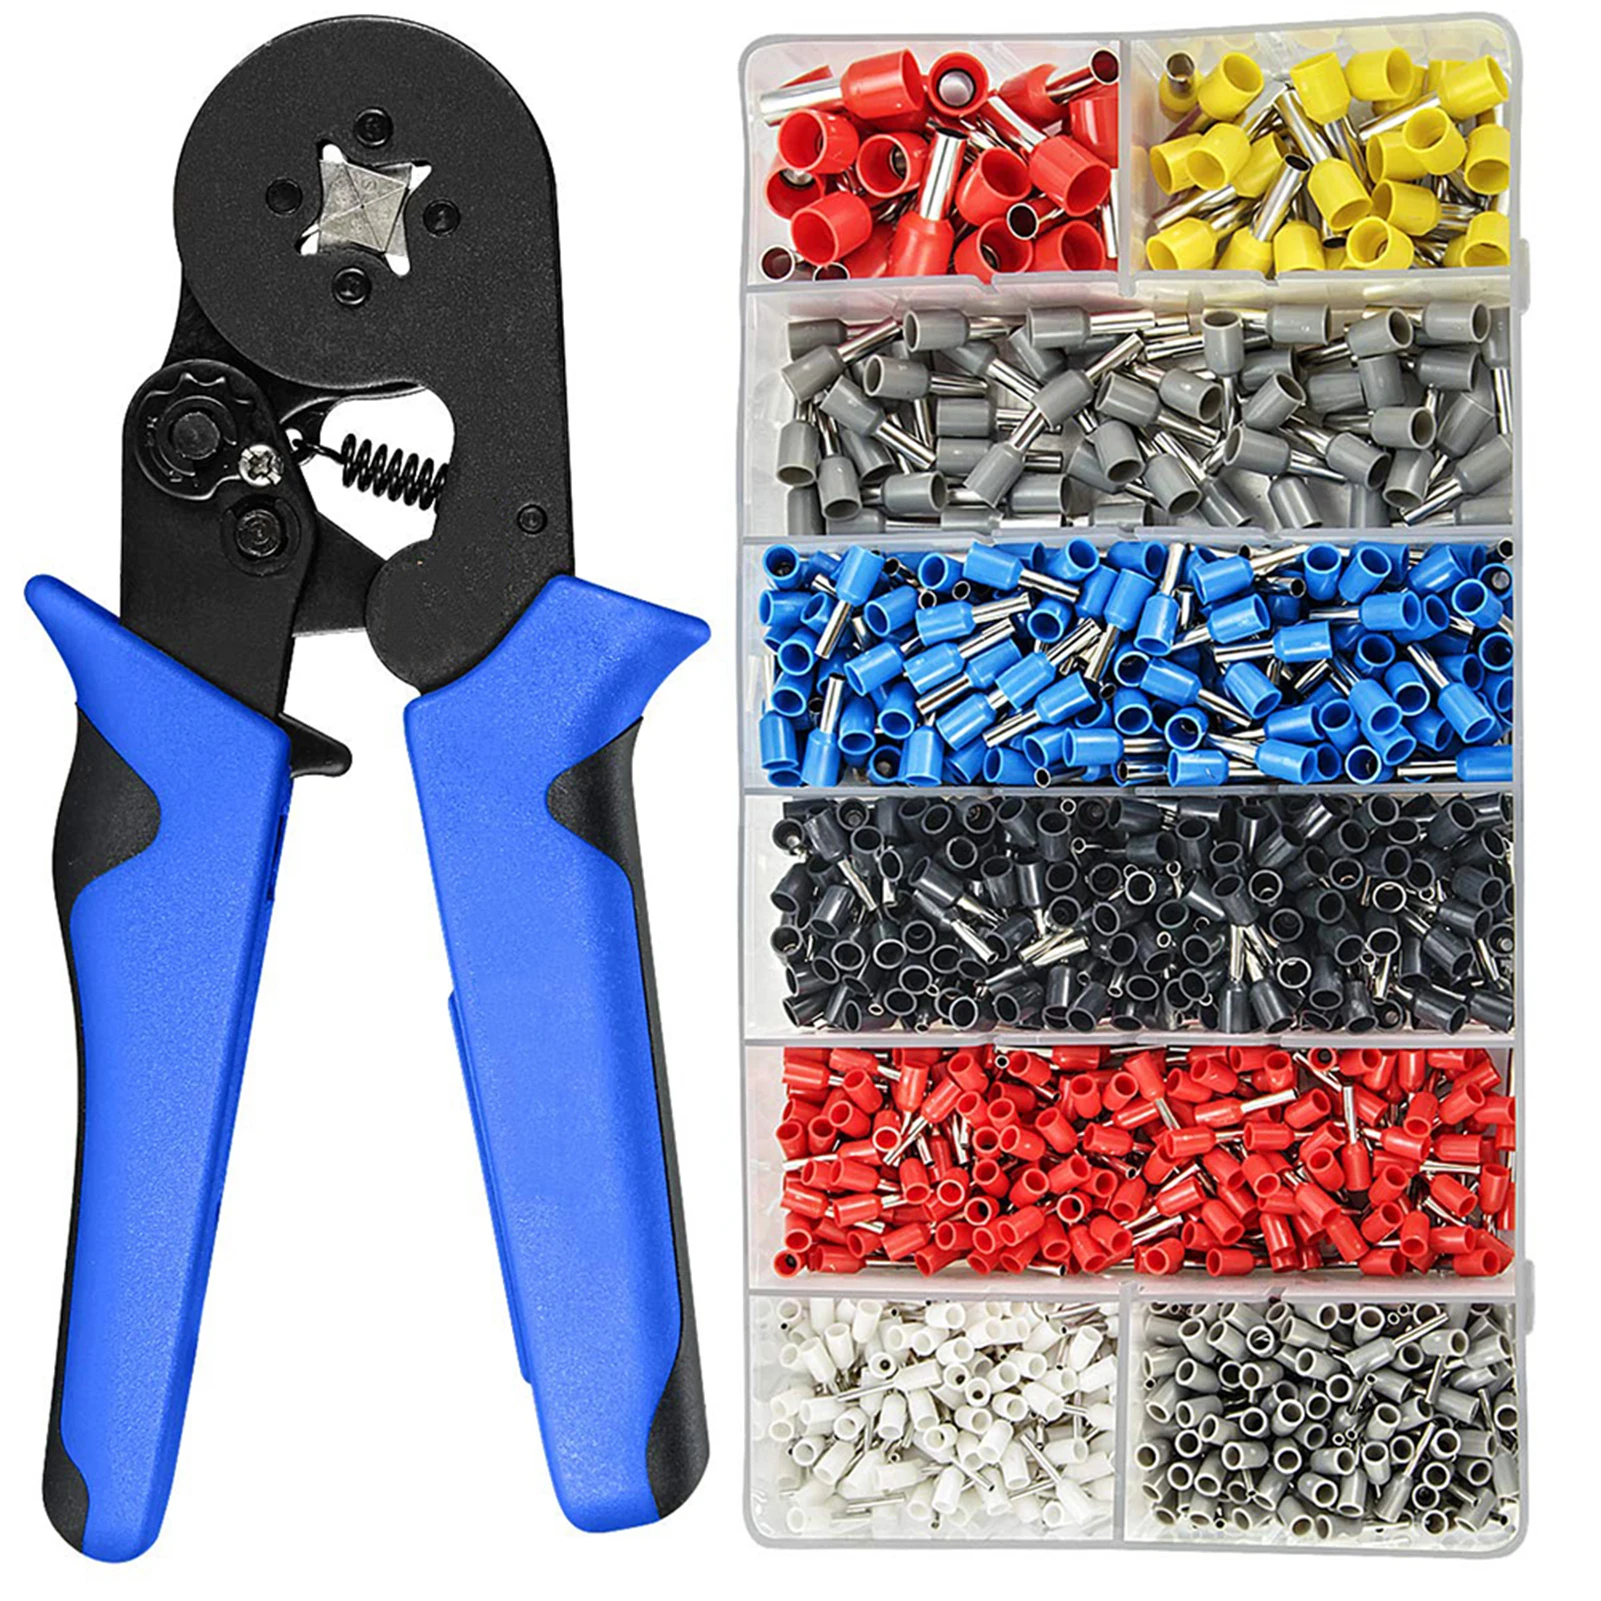 

1200Pcs Ferrule Crimping Tool Kit Ferrule Crimper Plier 1200Pcs Wire Ferrules Ends Terminals Cold Press Terminal with Tool Boxed